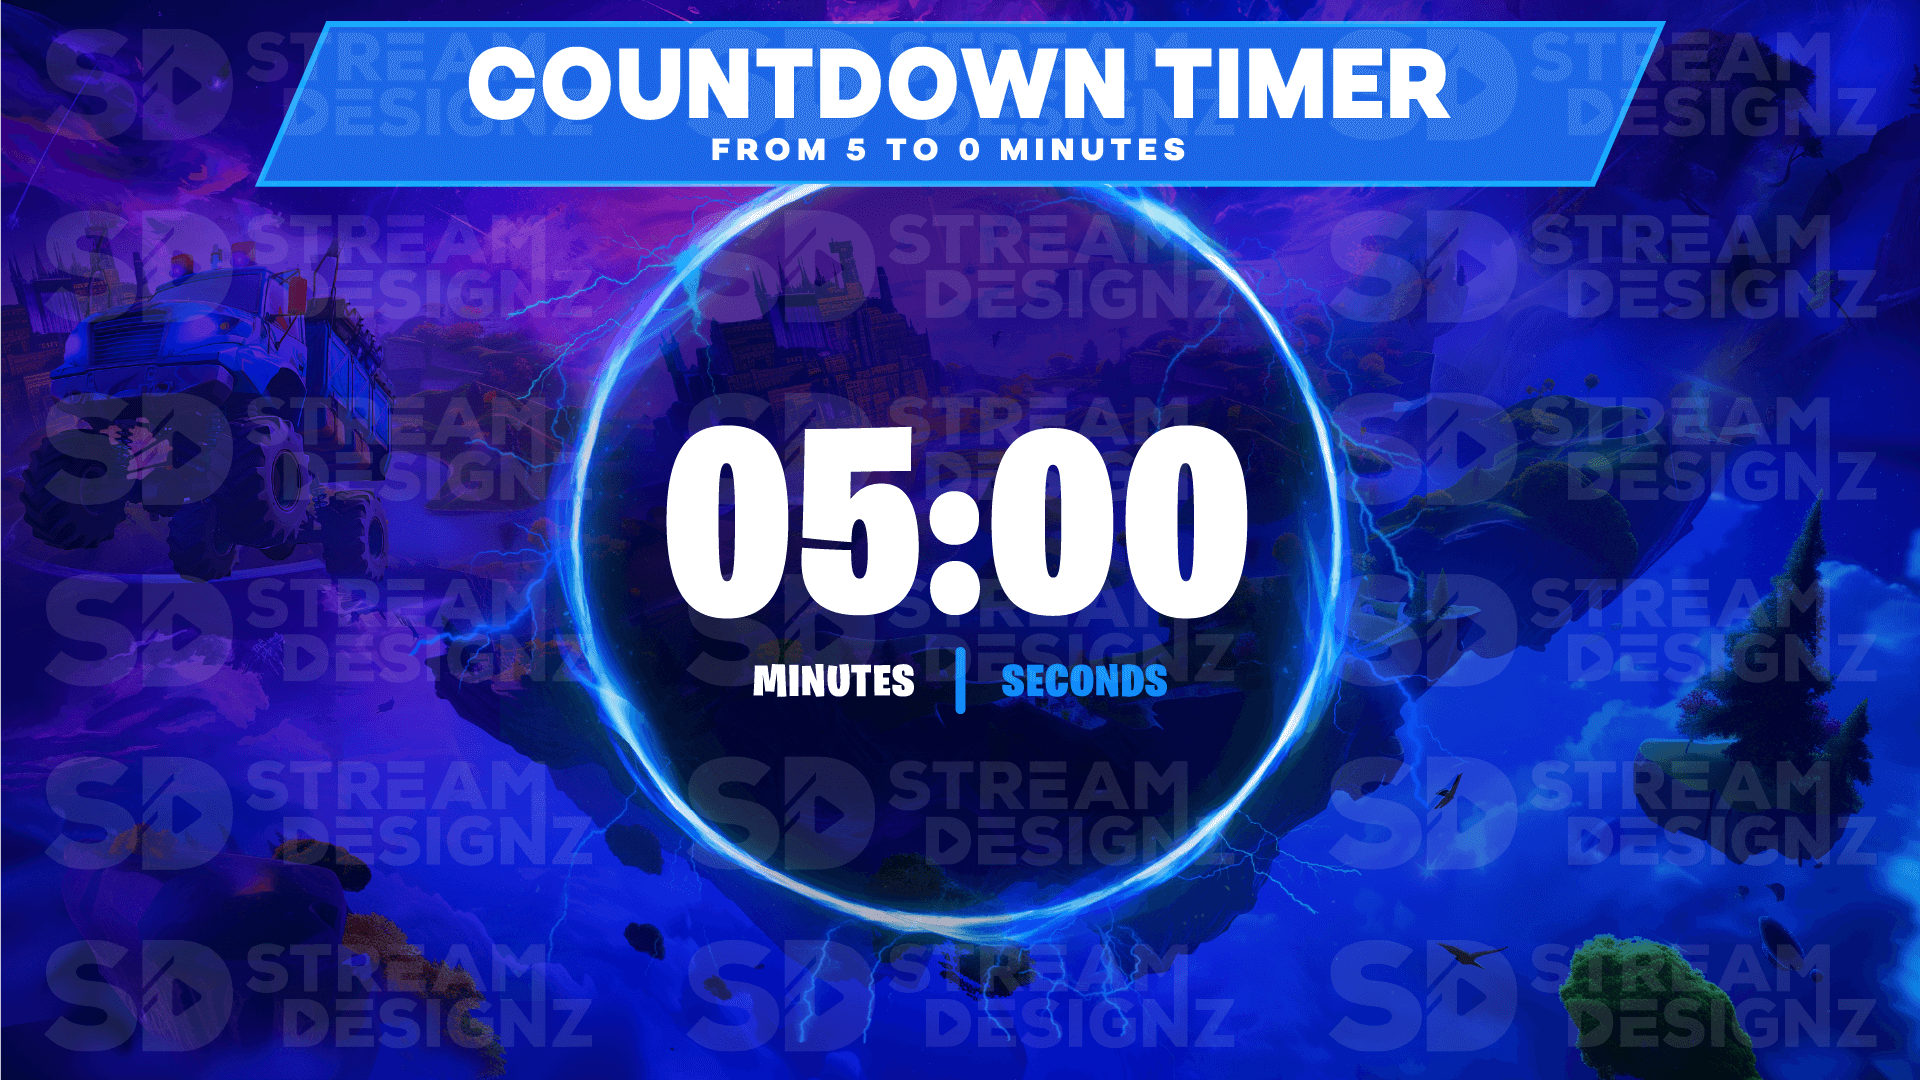 Ultimate stream package 5 minute countdown timer royale stream designz